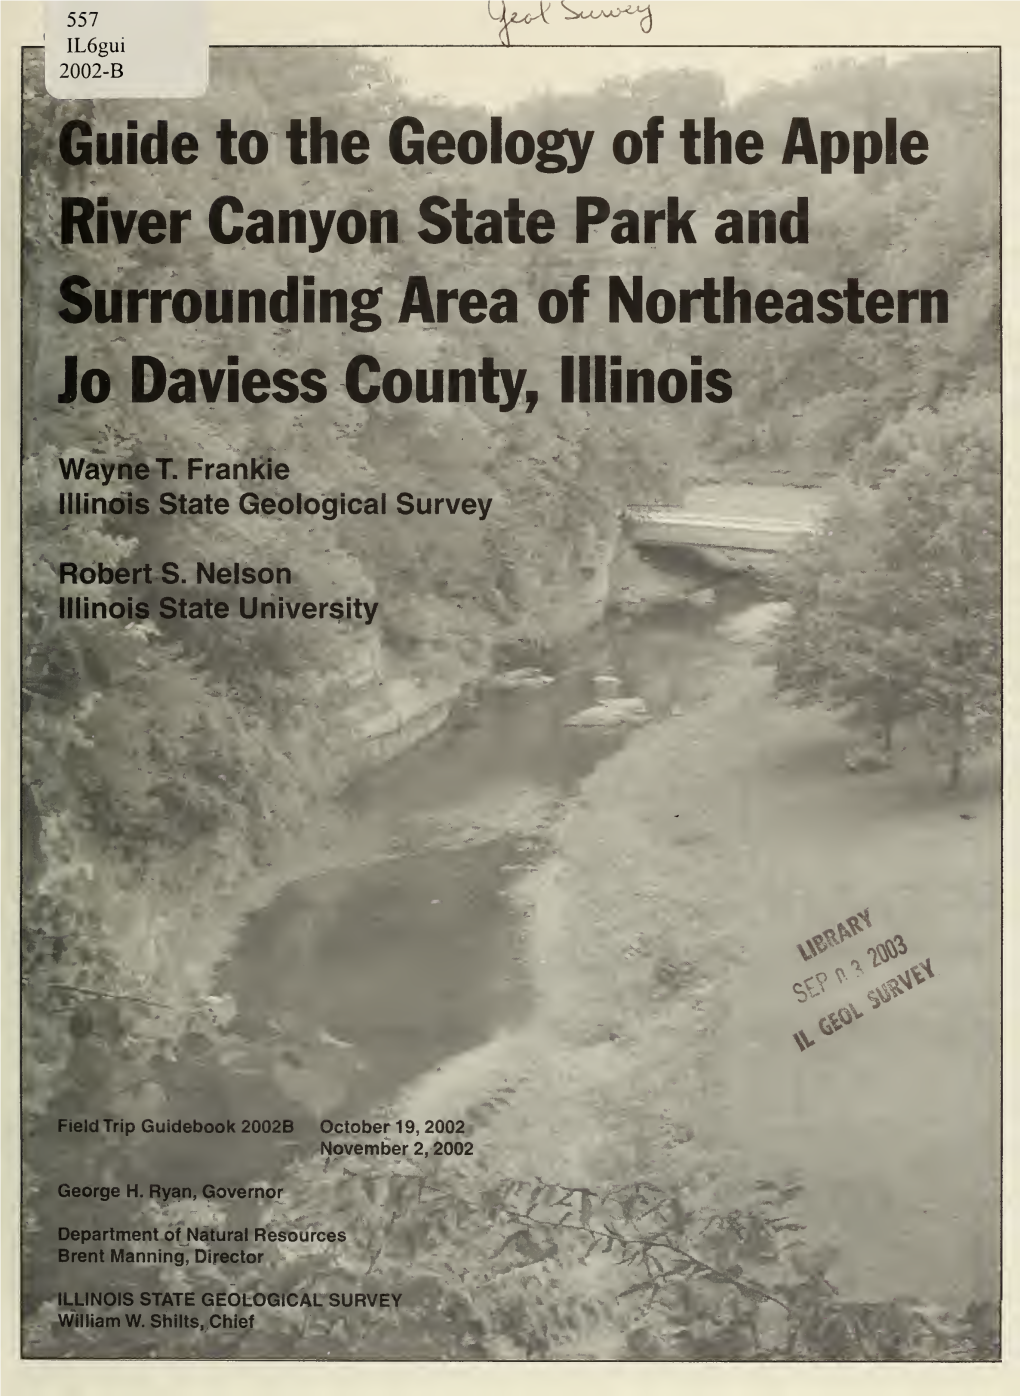 Guide to the Geology of the Apple River Canyon State Park and Surrounding Area of Northeastern